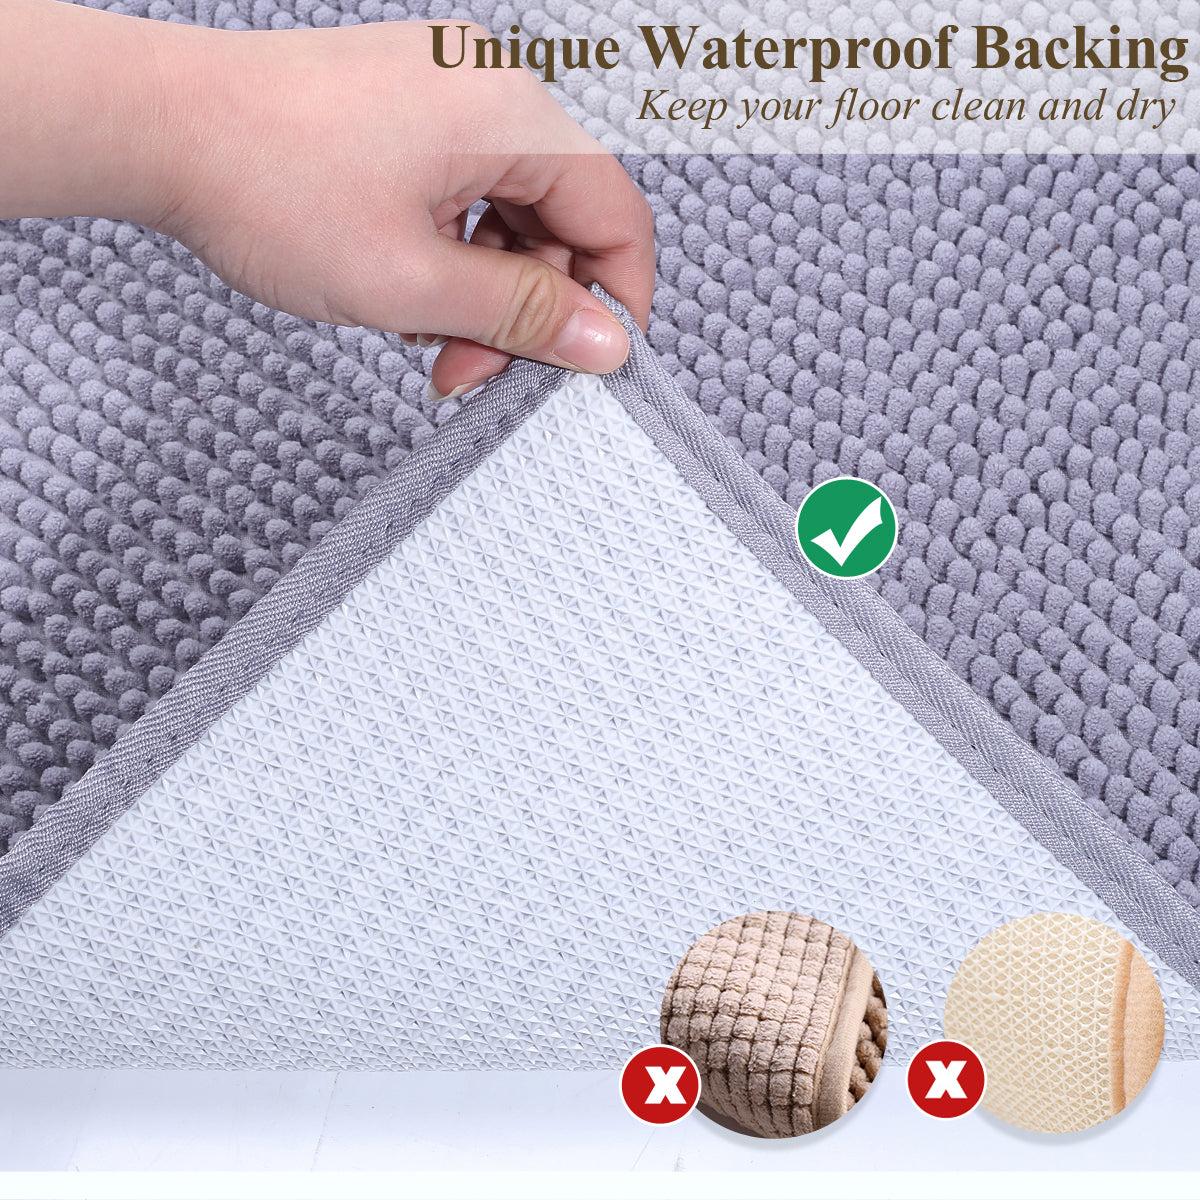 Vivaglory Cat Litter Mats, 31× 20 Large or 35× 25 Extra Large